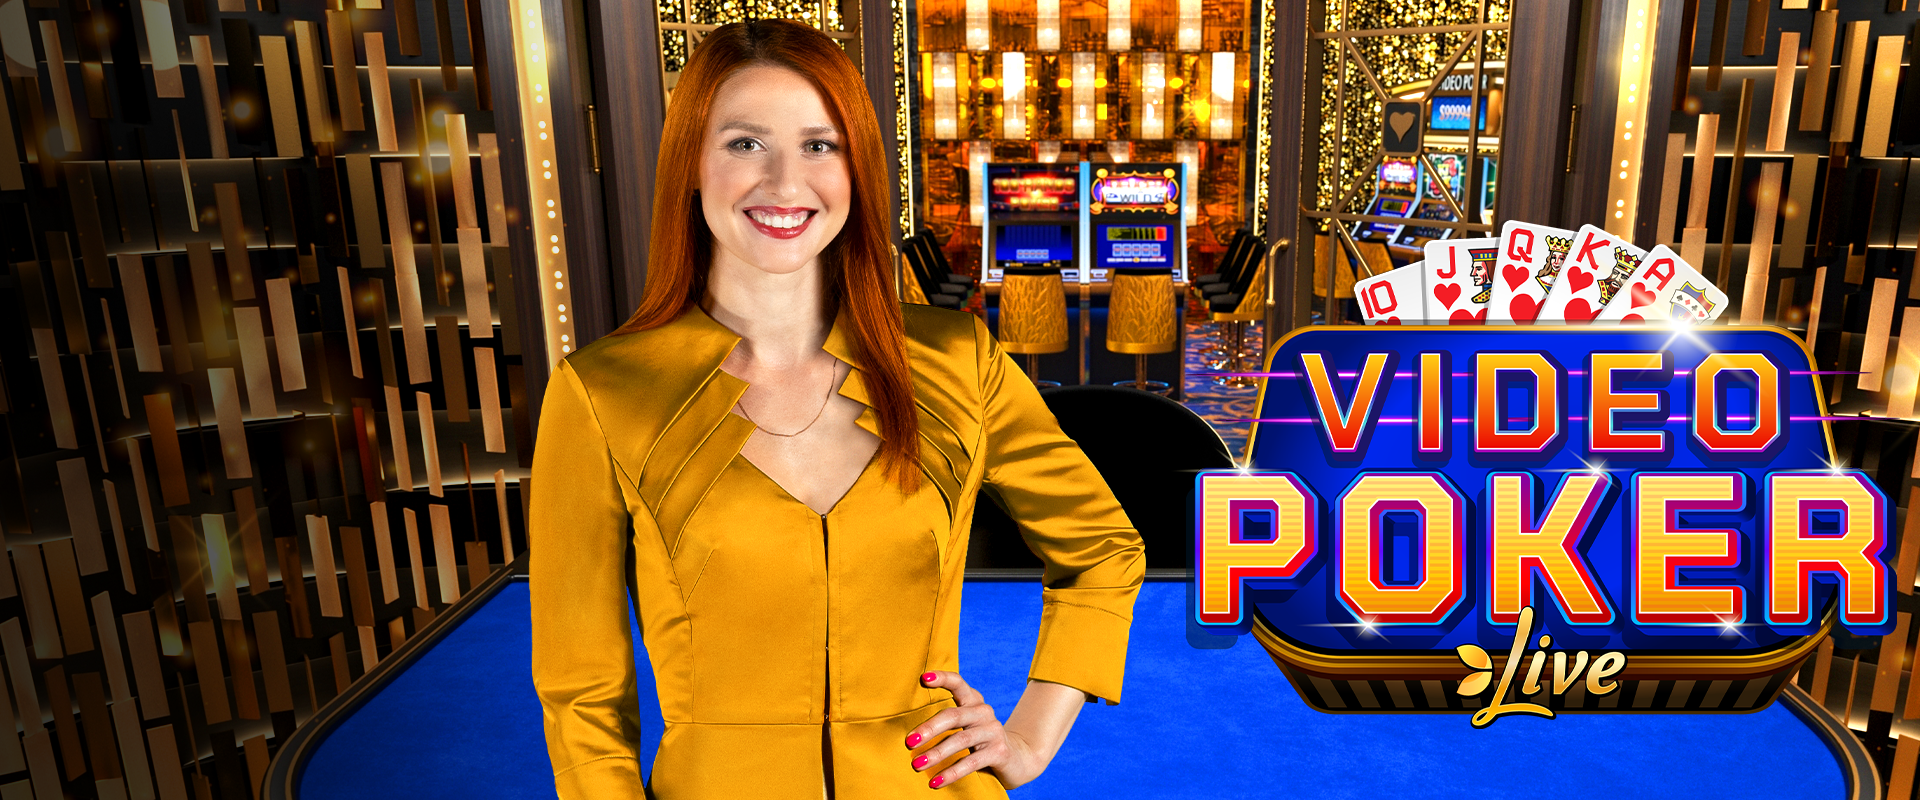 The Live Casino Game Video Poker from Evolution